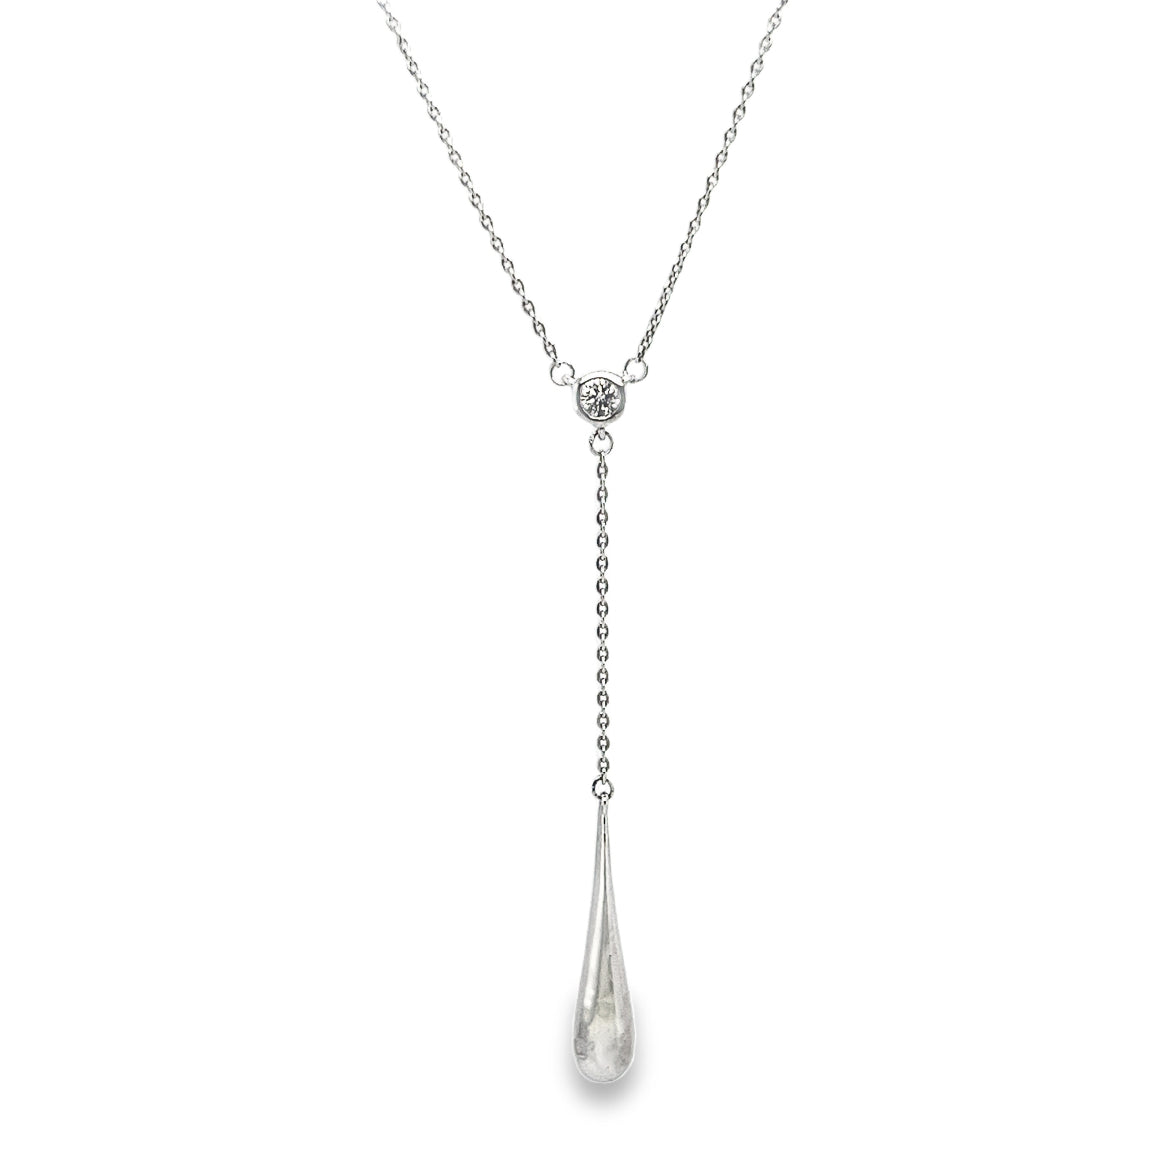 Beautiful Dangling Tear Diamond Necklace in 18K White gold  - SIR1300